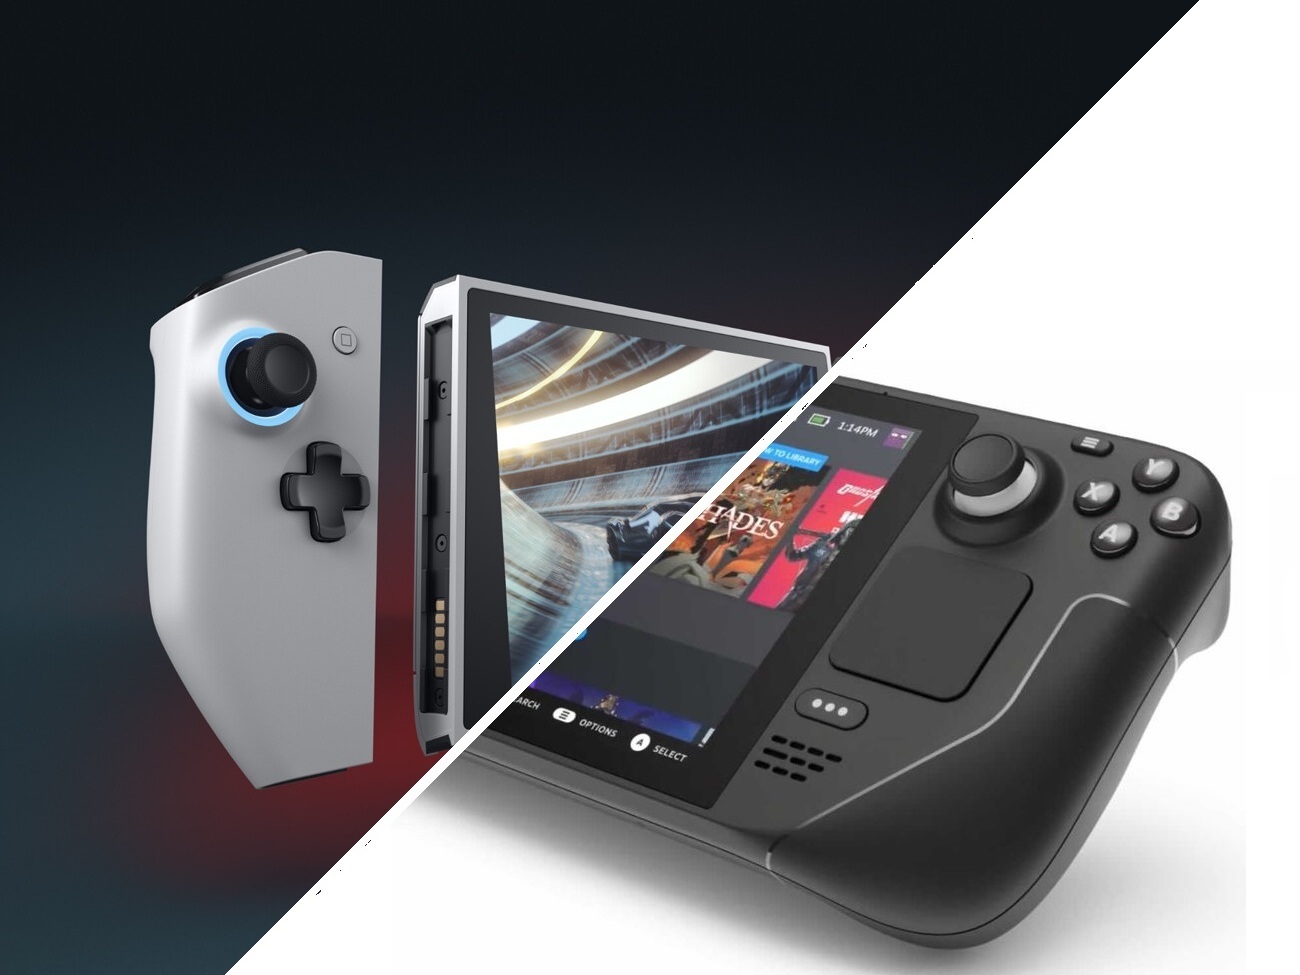 Valve launches Steam Deck, a $400 PC gaming portable